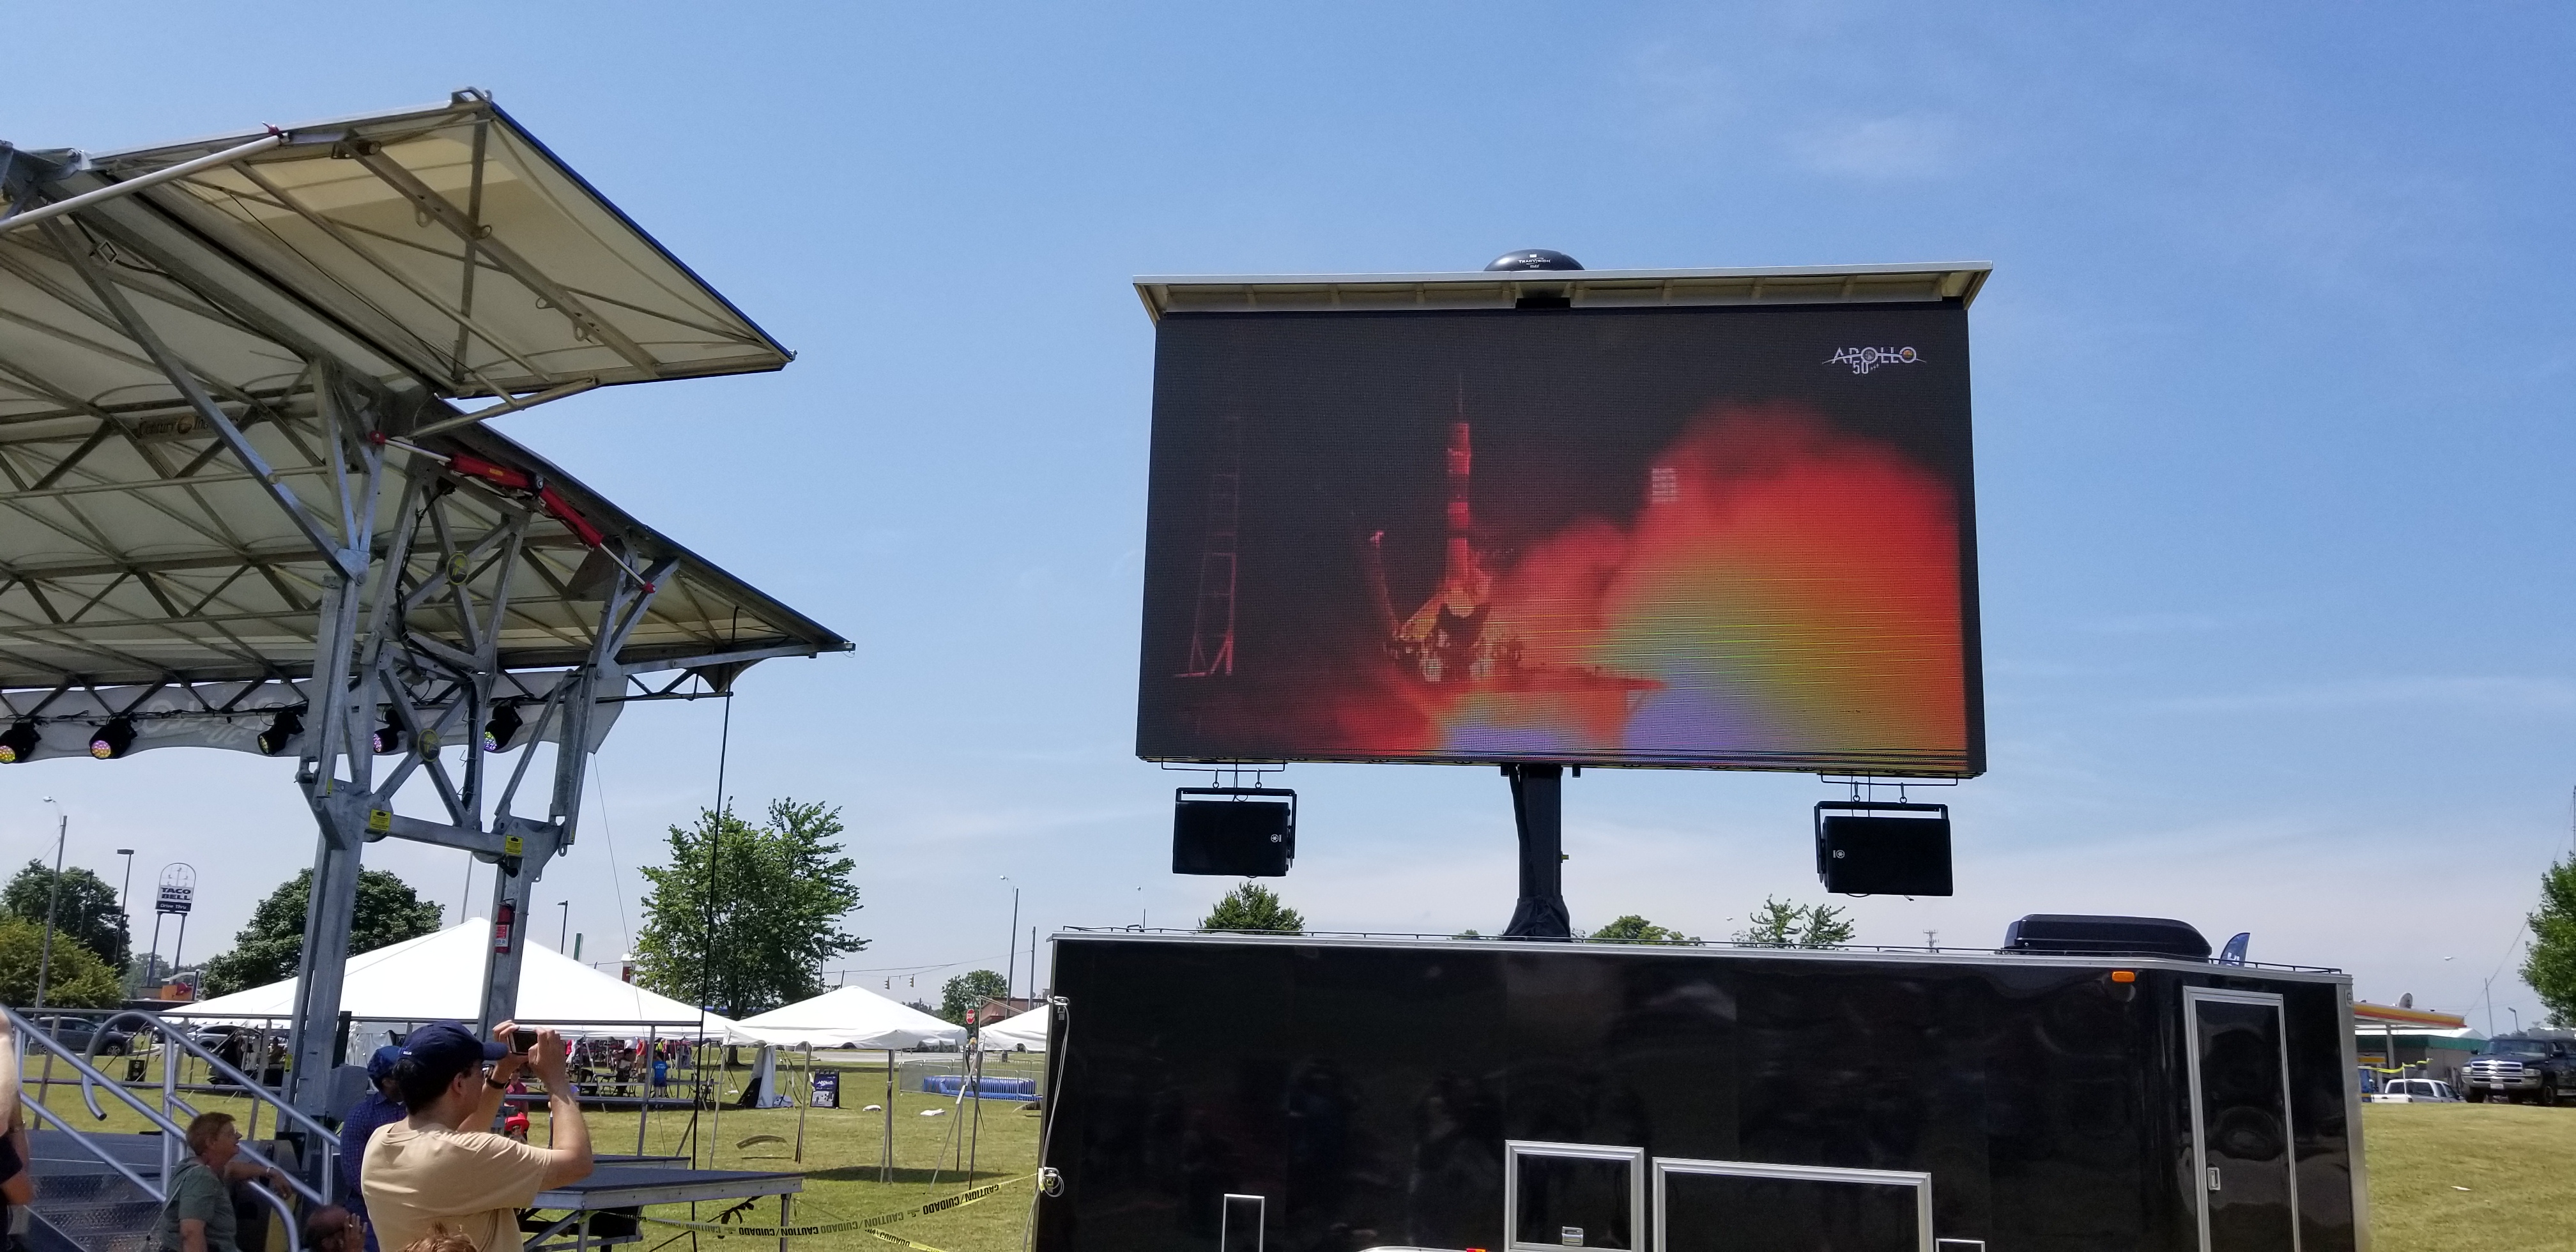 Live feed of a Soyuz launch at the Armstrong Air and Space Museum